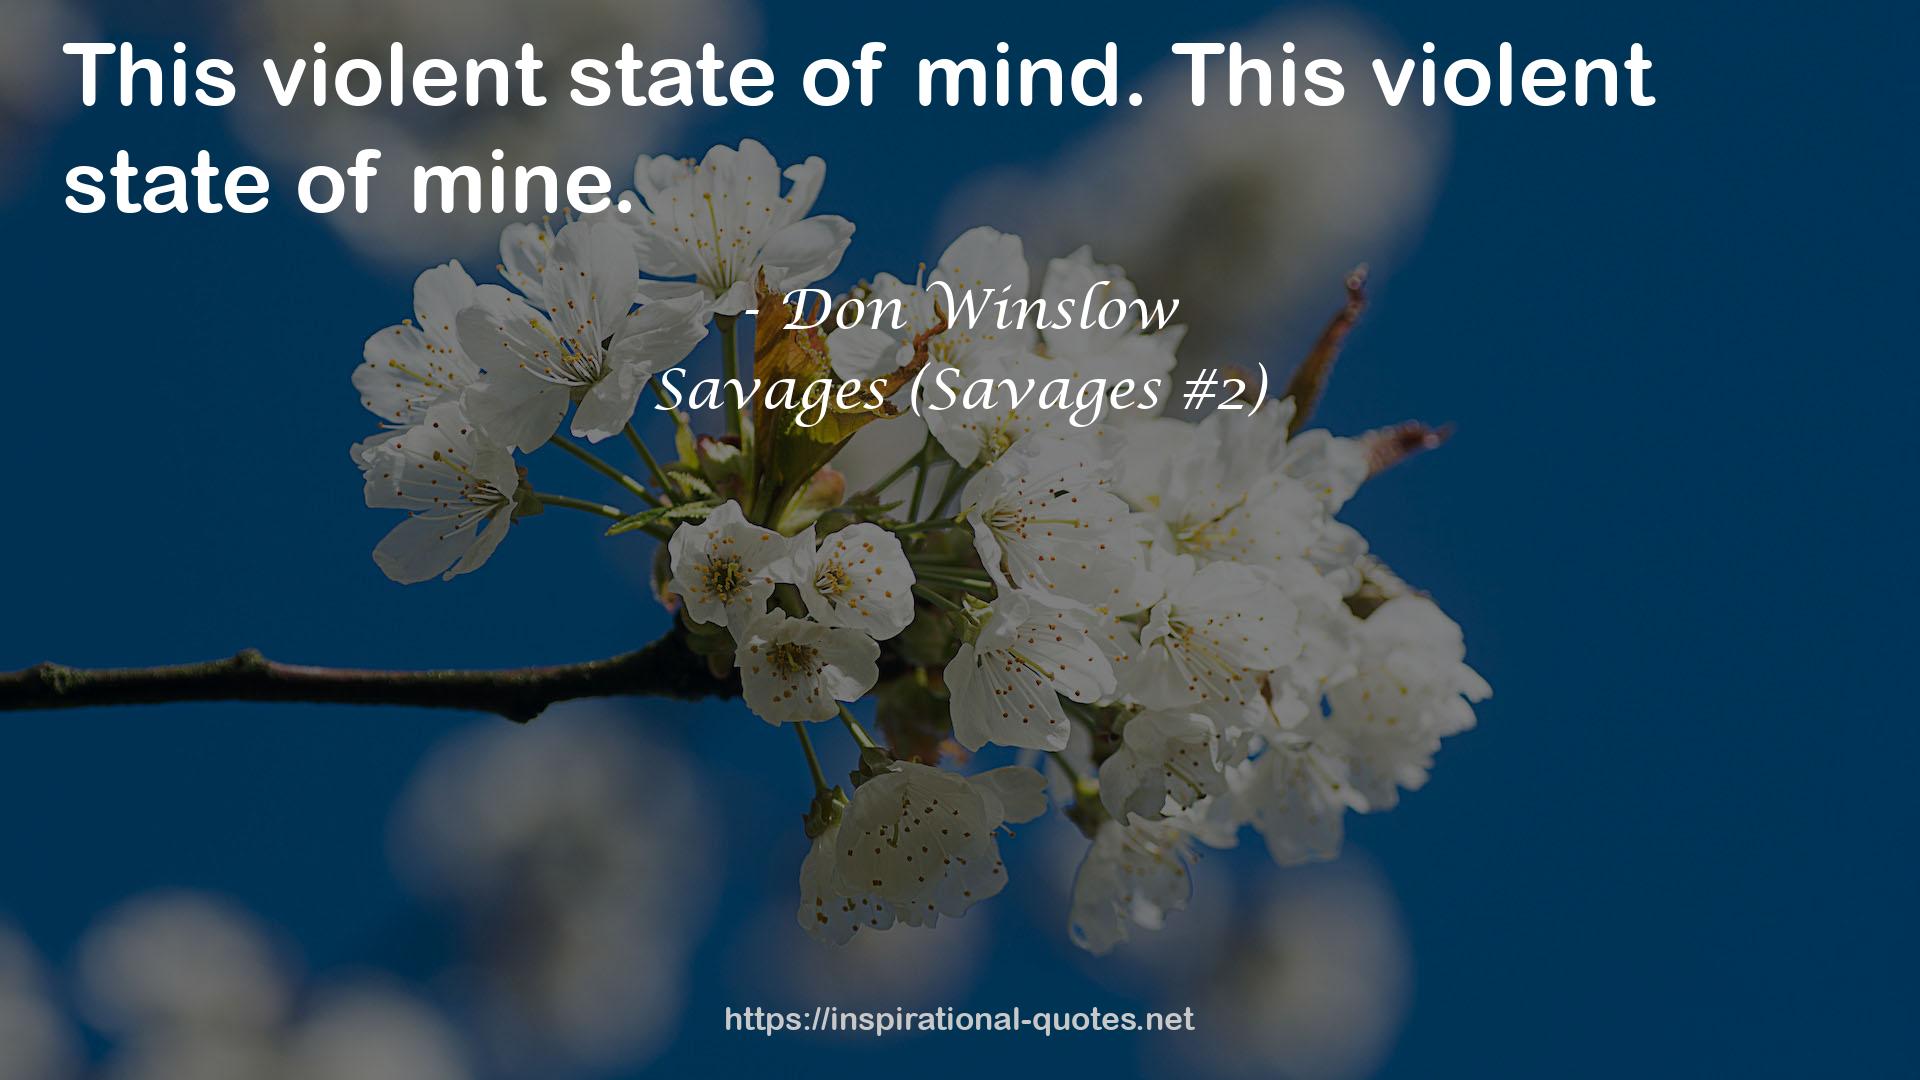 Savages (Savages #2) QUOTES